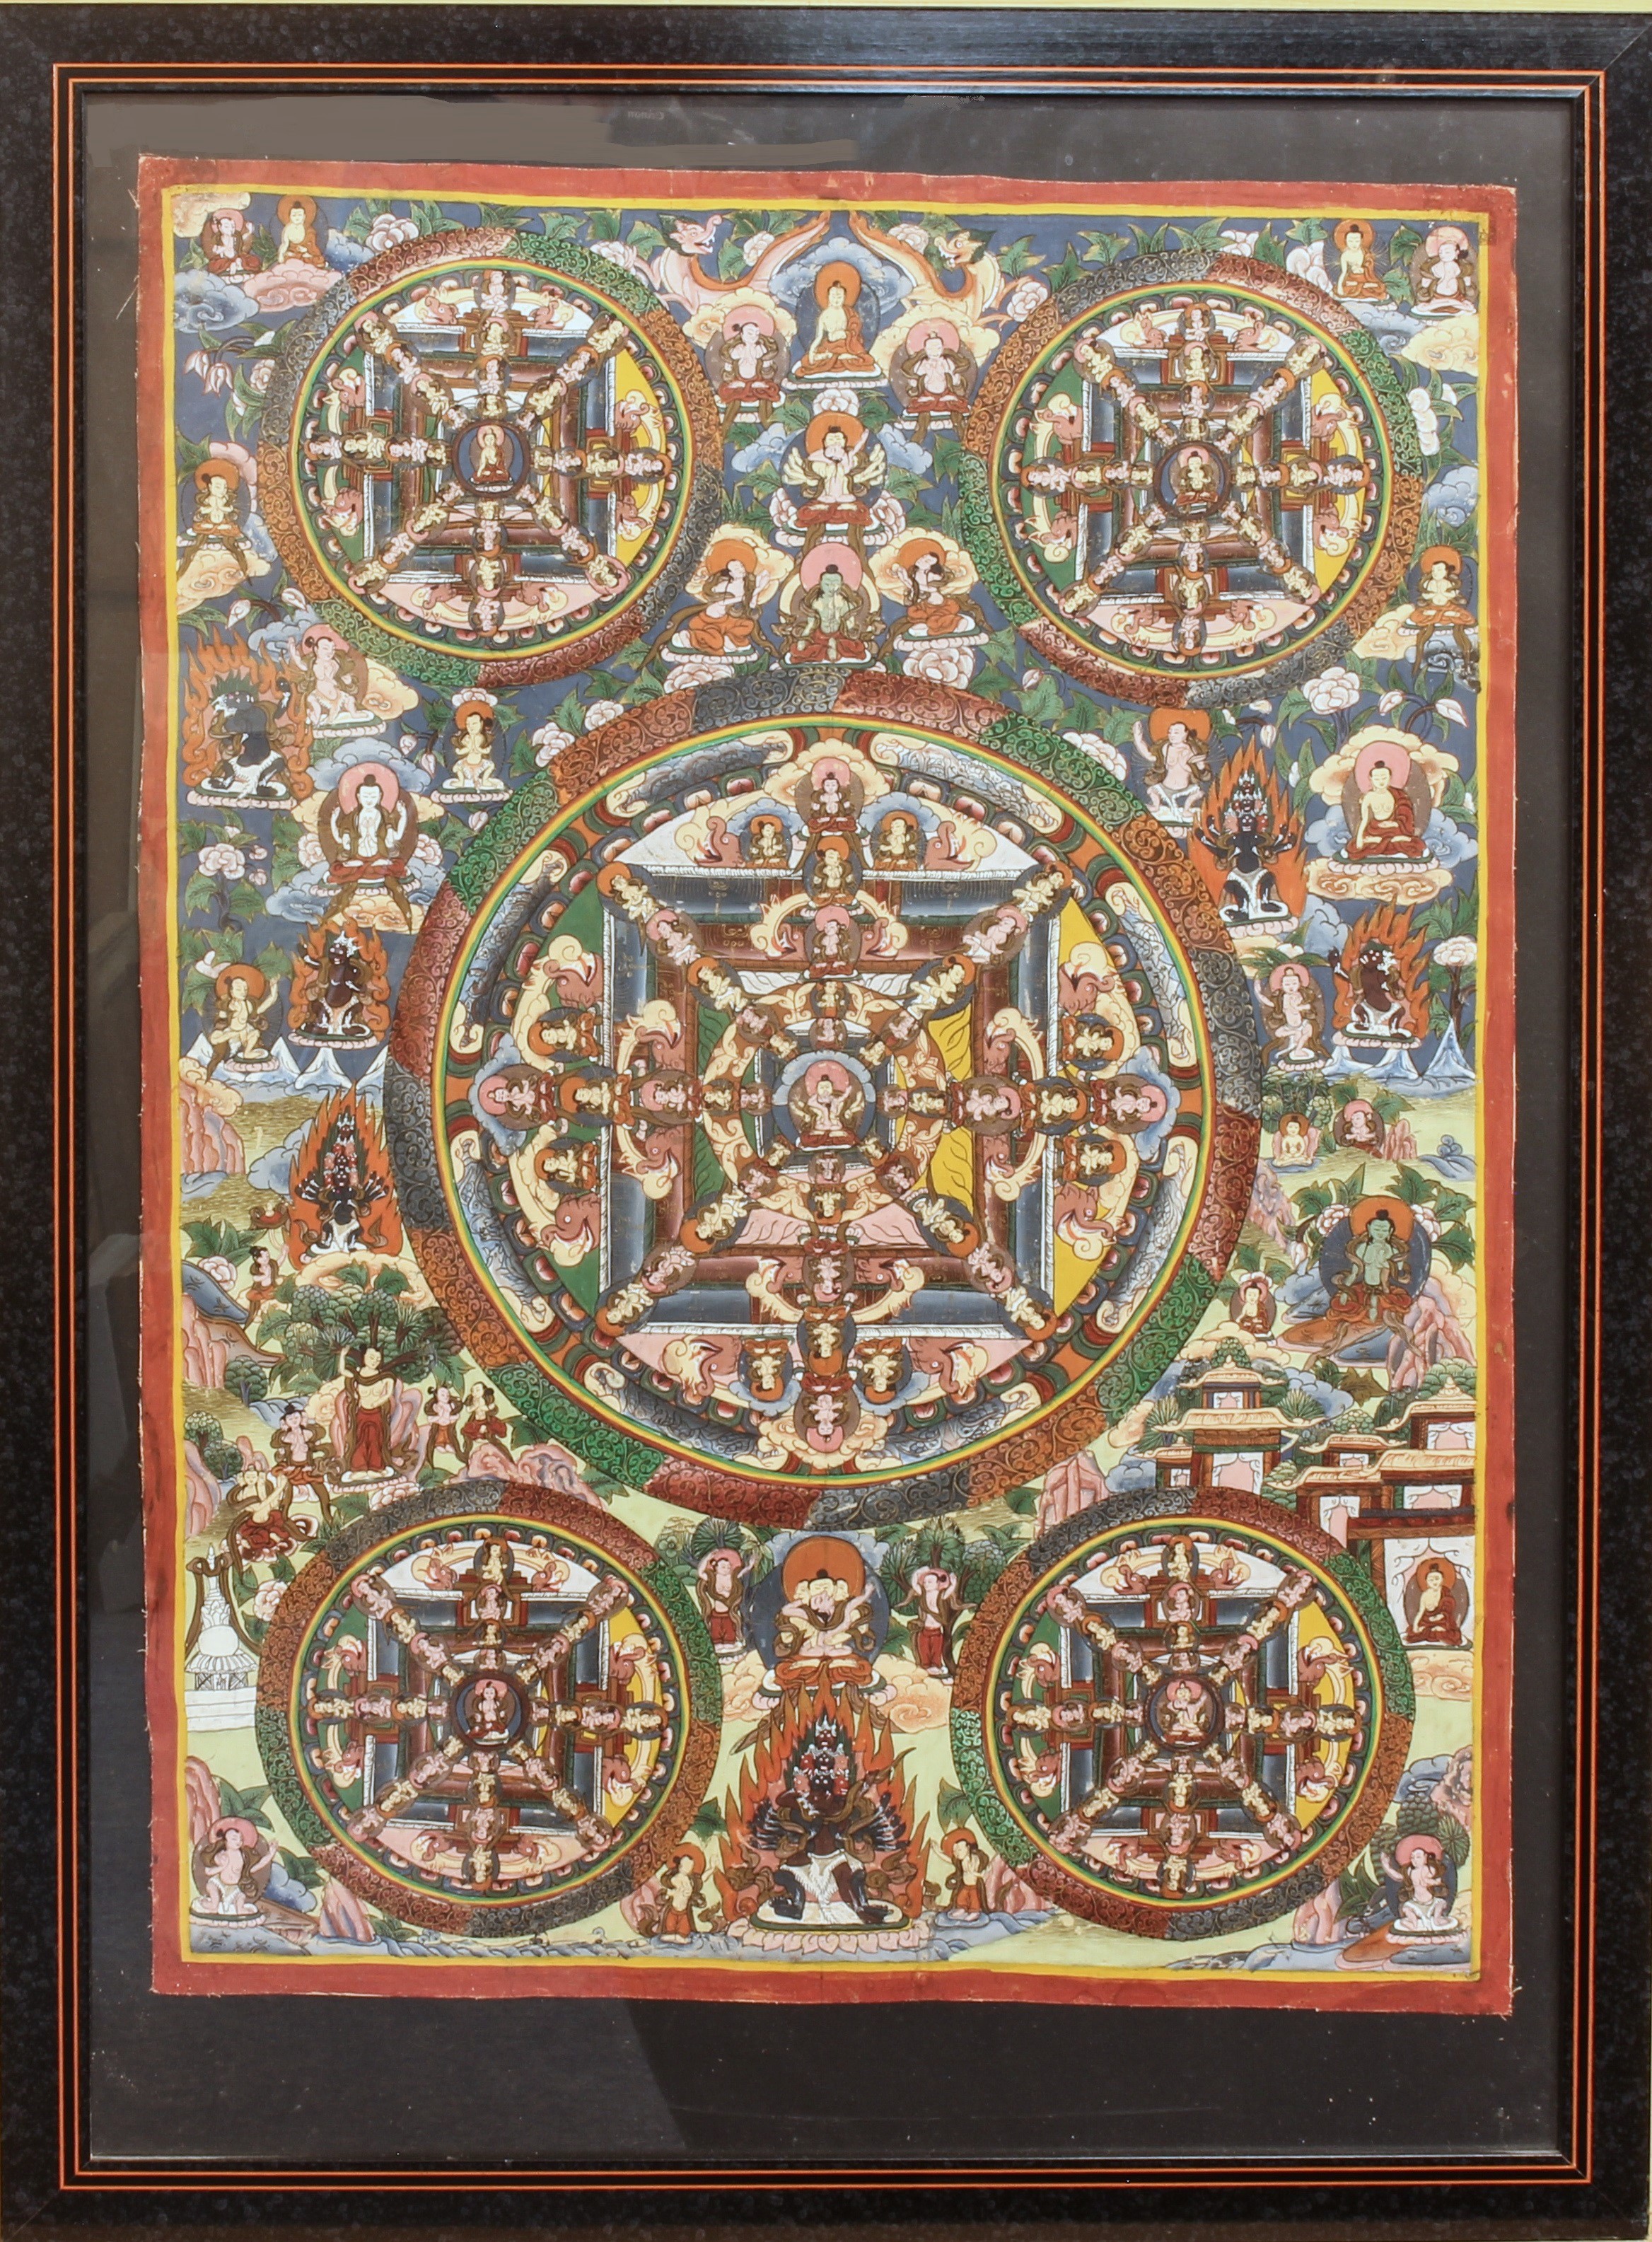 A Tibetan Five Buddhas Mandala Thangka - 20th century, gouache on linen, painted with a central - Image 2 of 3